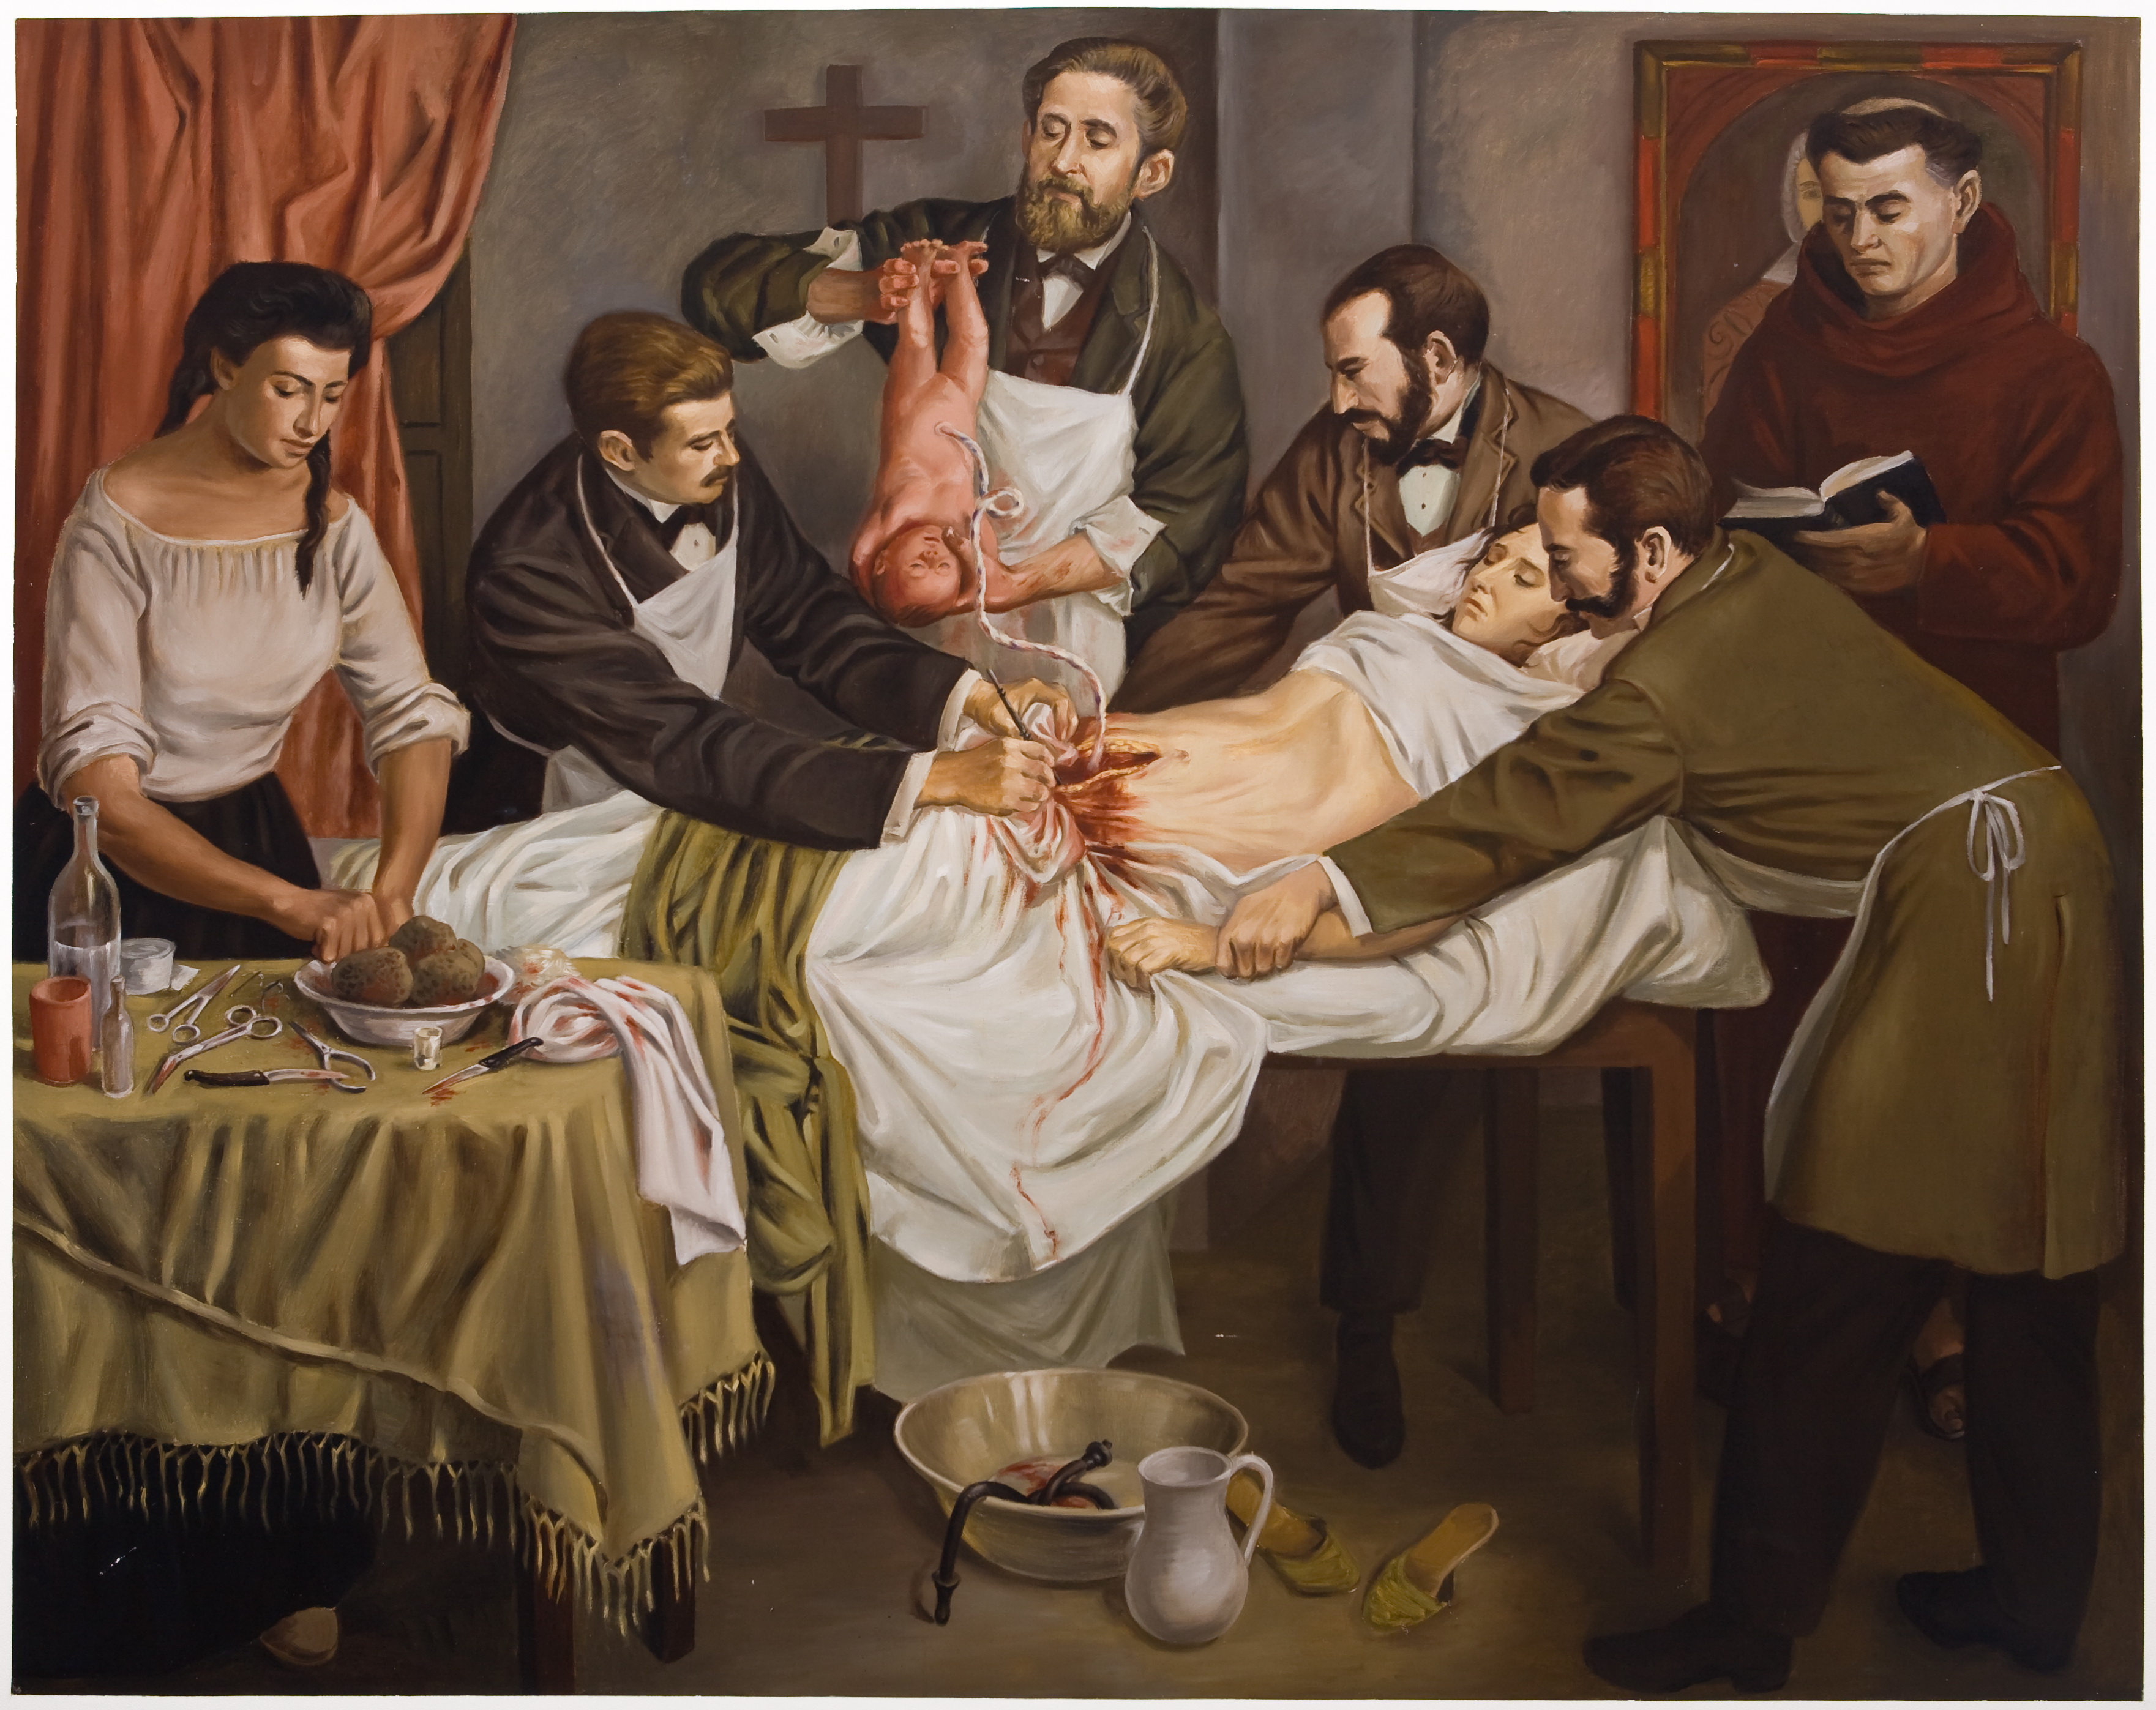 Color painting of a cesarean section. Patient is laying on her back and is held down by two men beside her. The doctor stands above her with the baby in his hands. Another man helps with a vertical abdominal incision beside the doctor. A woman on the left side of the painting at a table with surgical instruments helps during the procedure.